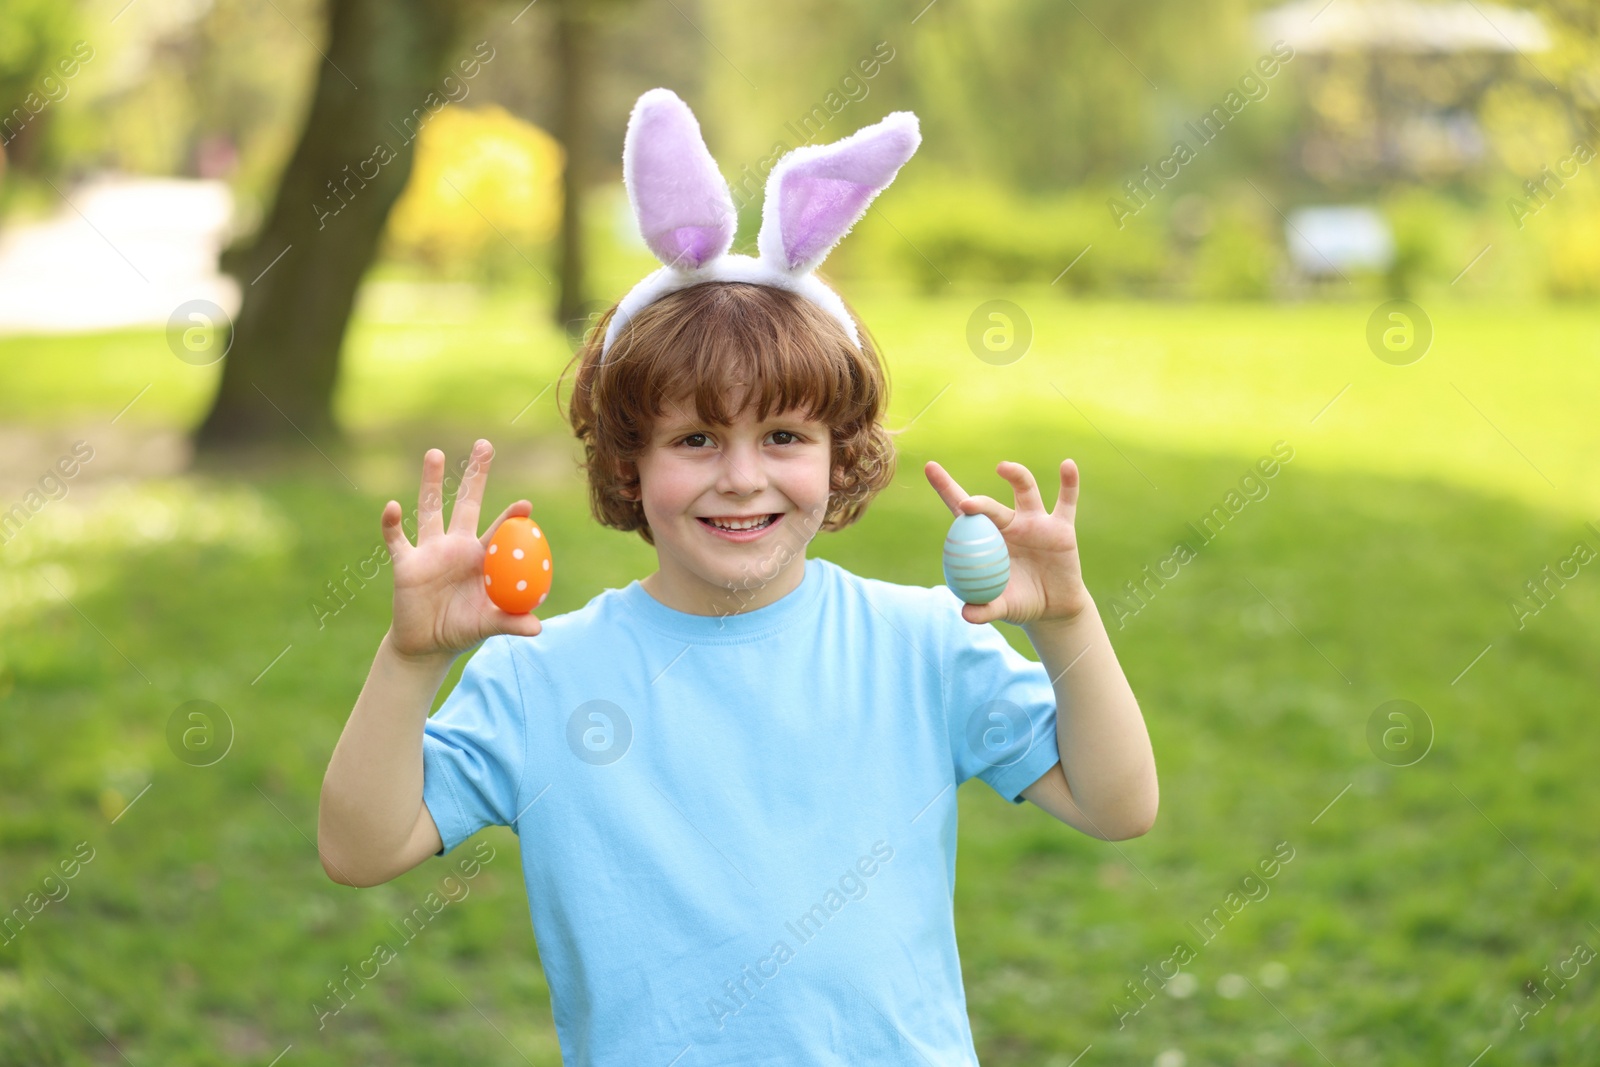 Photo of Easter celebration. Cute little boy in bunny ears holding painted eggs outdoors